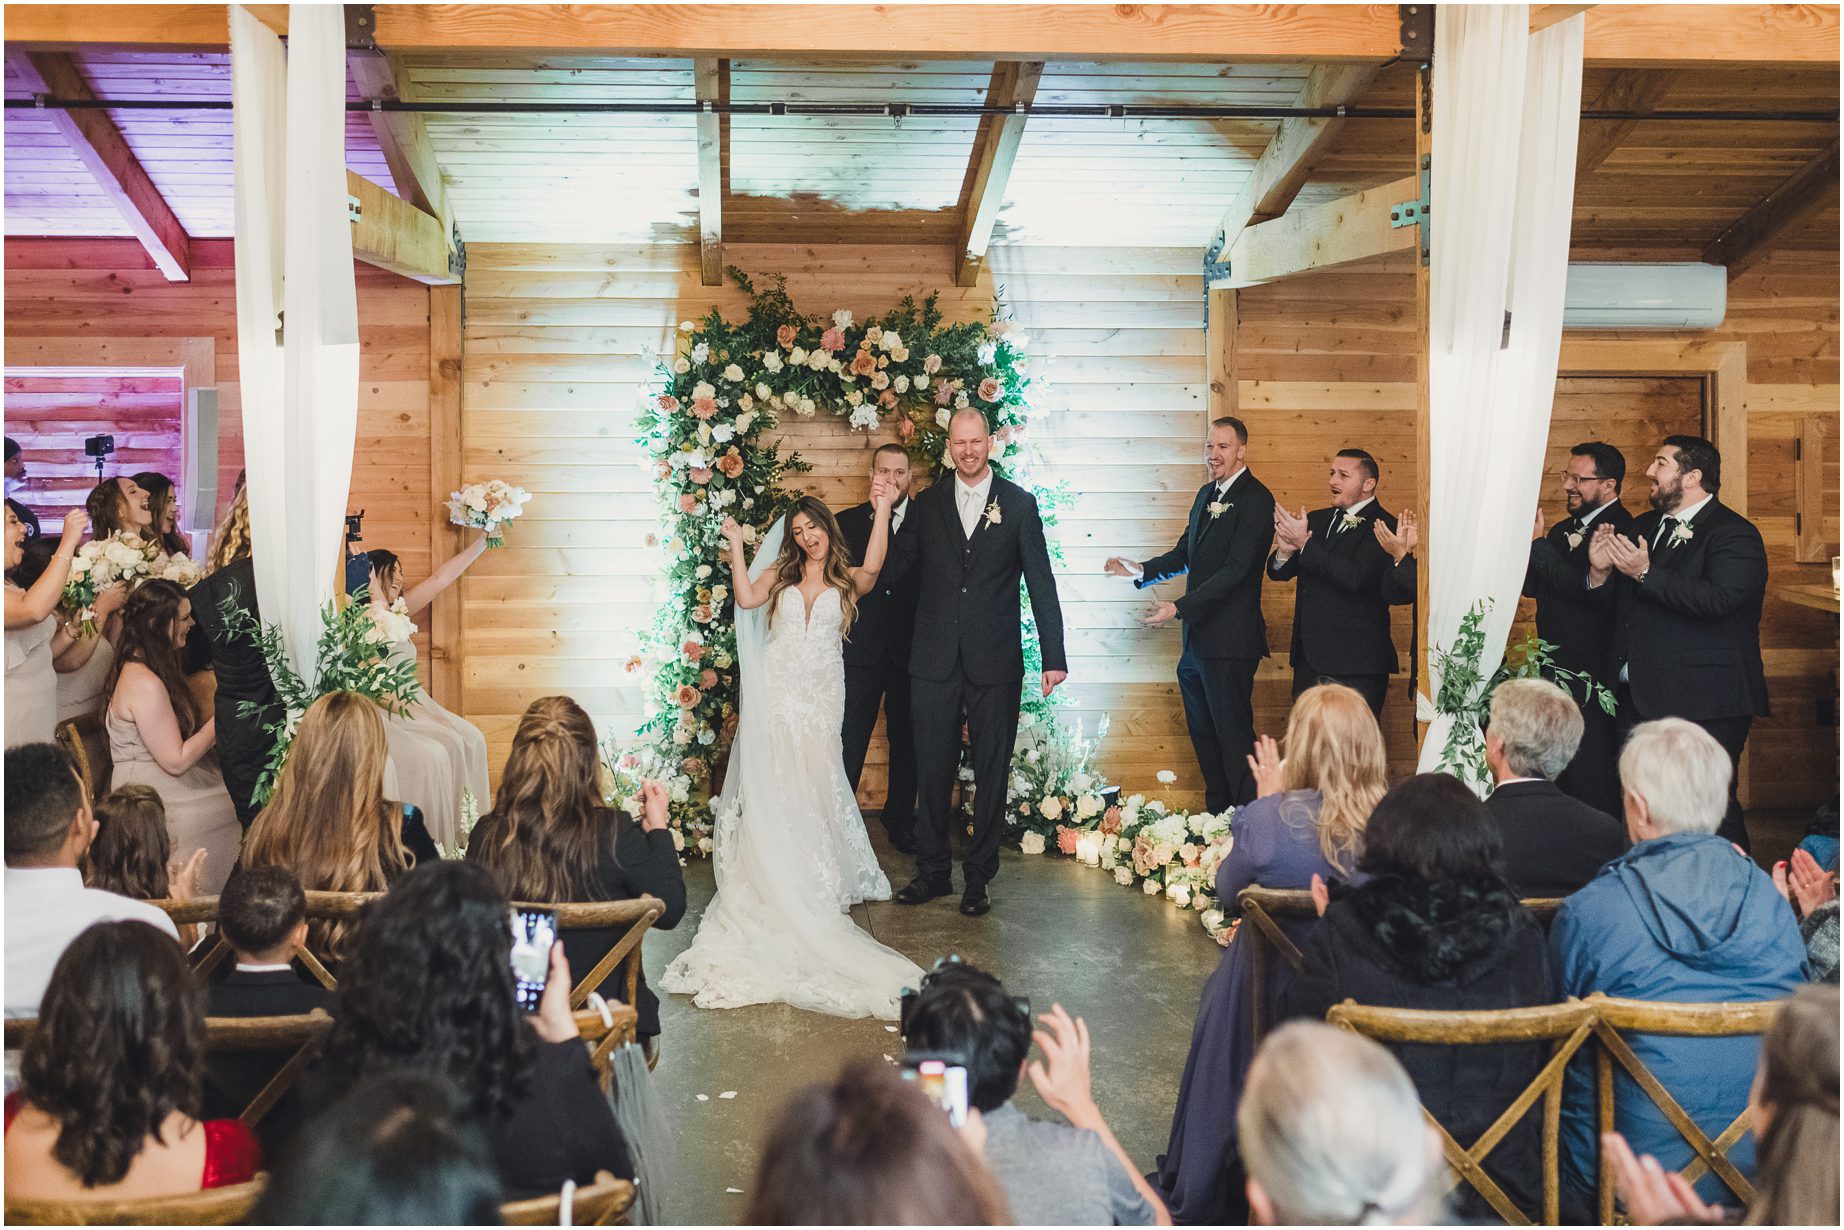 A bride and groom get married inside the barn at Serendipity Garden Weddings